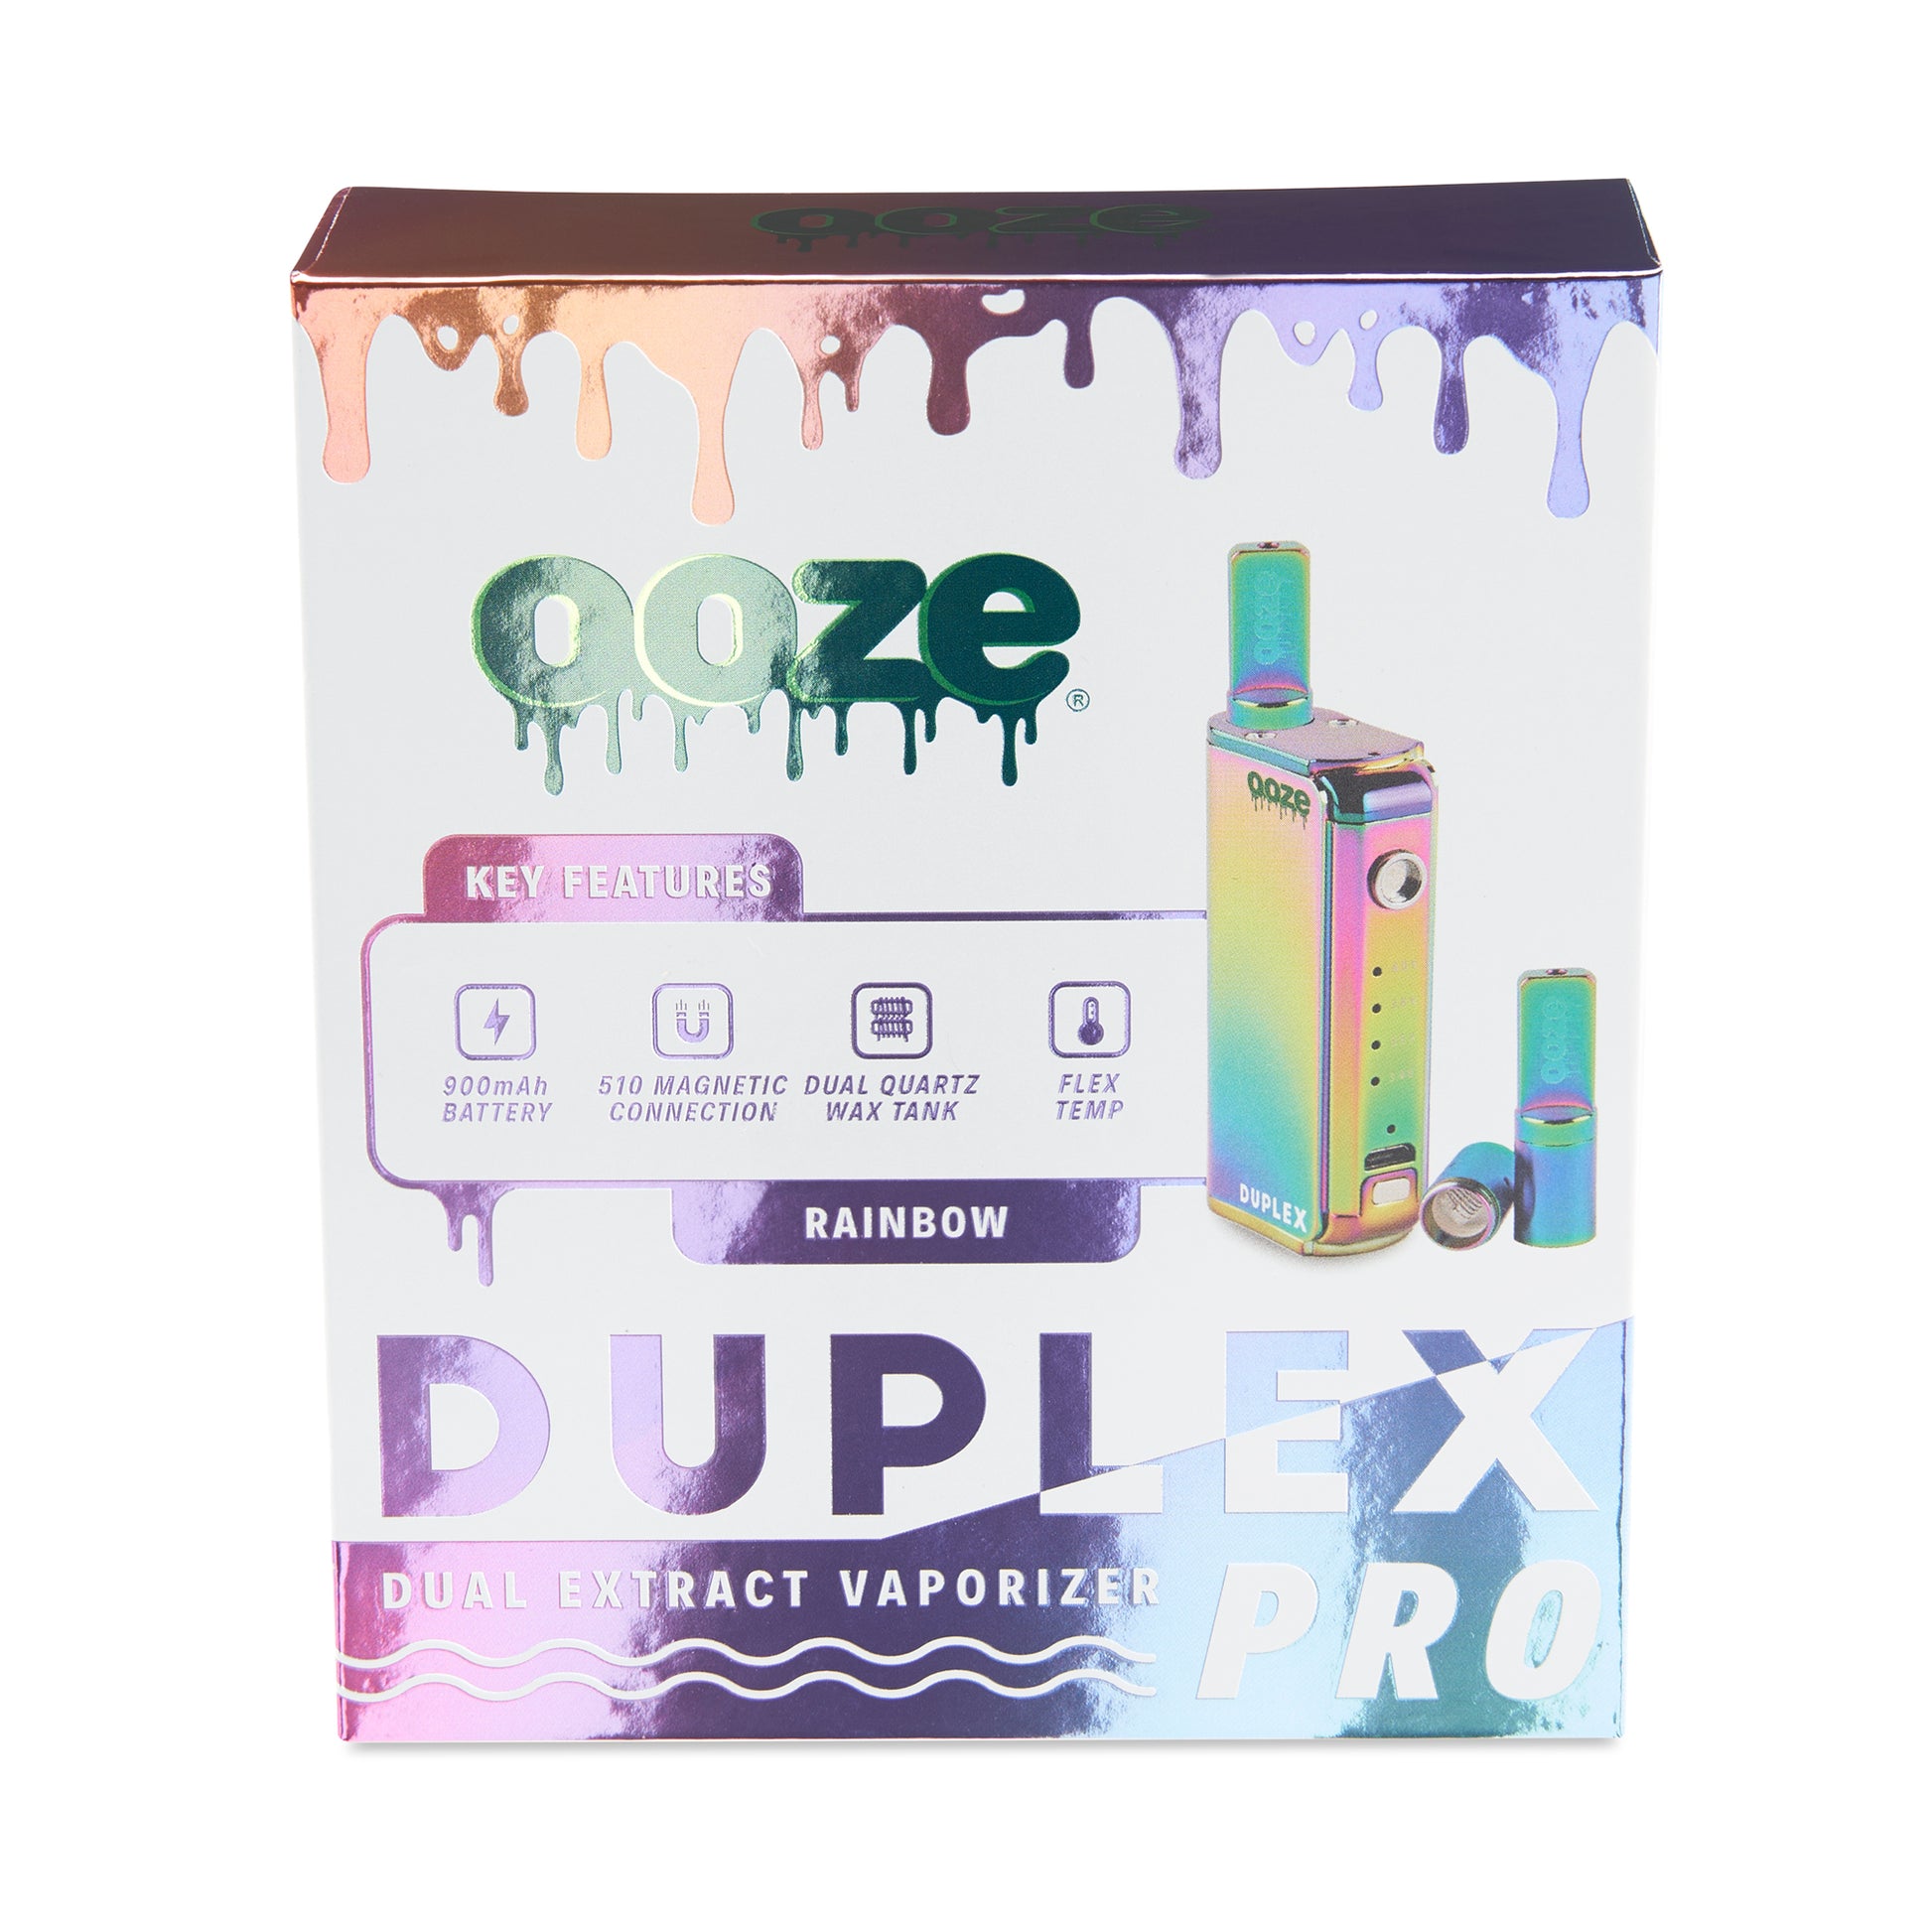 The front of the packaging for The Rainbow Ooze Duplex Pro Vaporizer